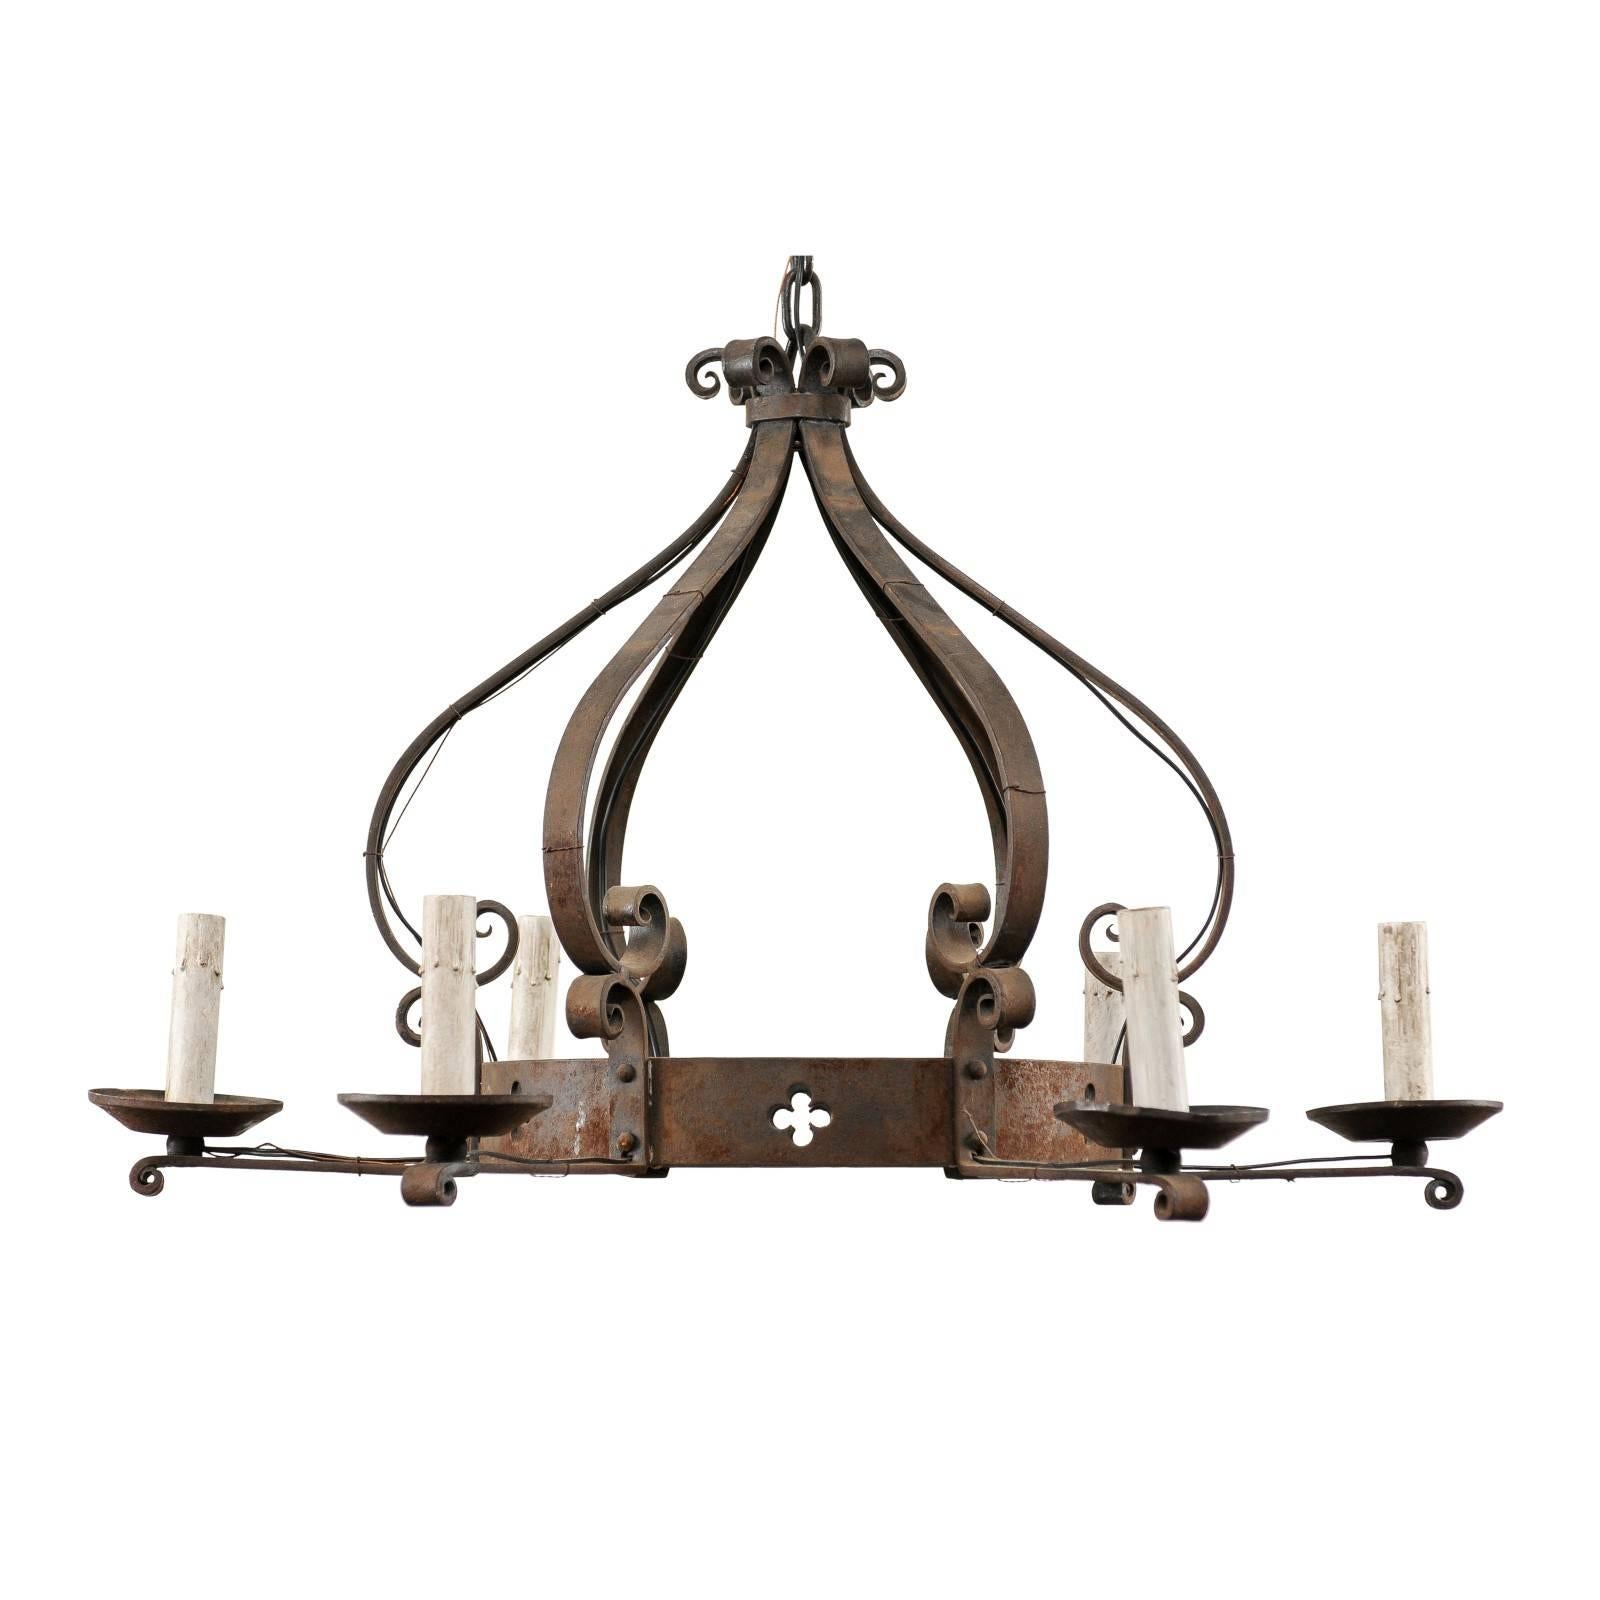 French Vintage Iron Chandelier with Crown Shape & Pierced Clover / Trefoil Decor